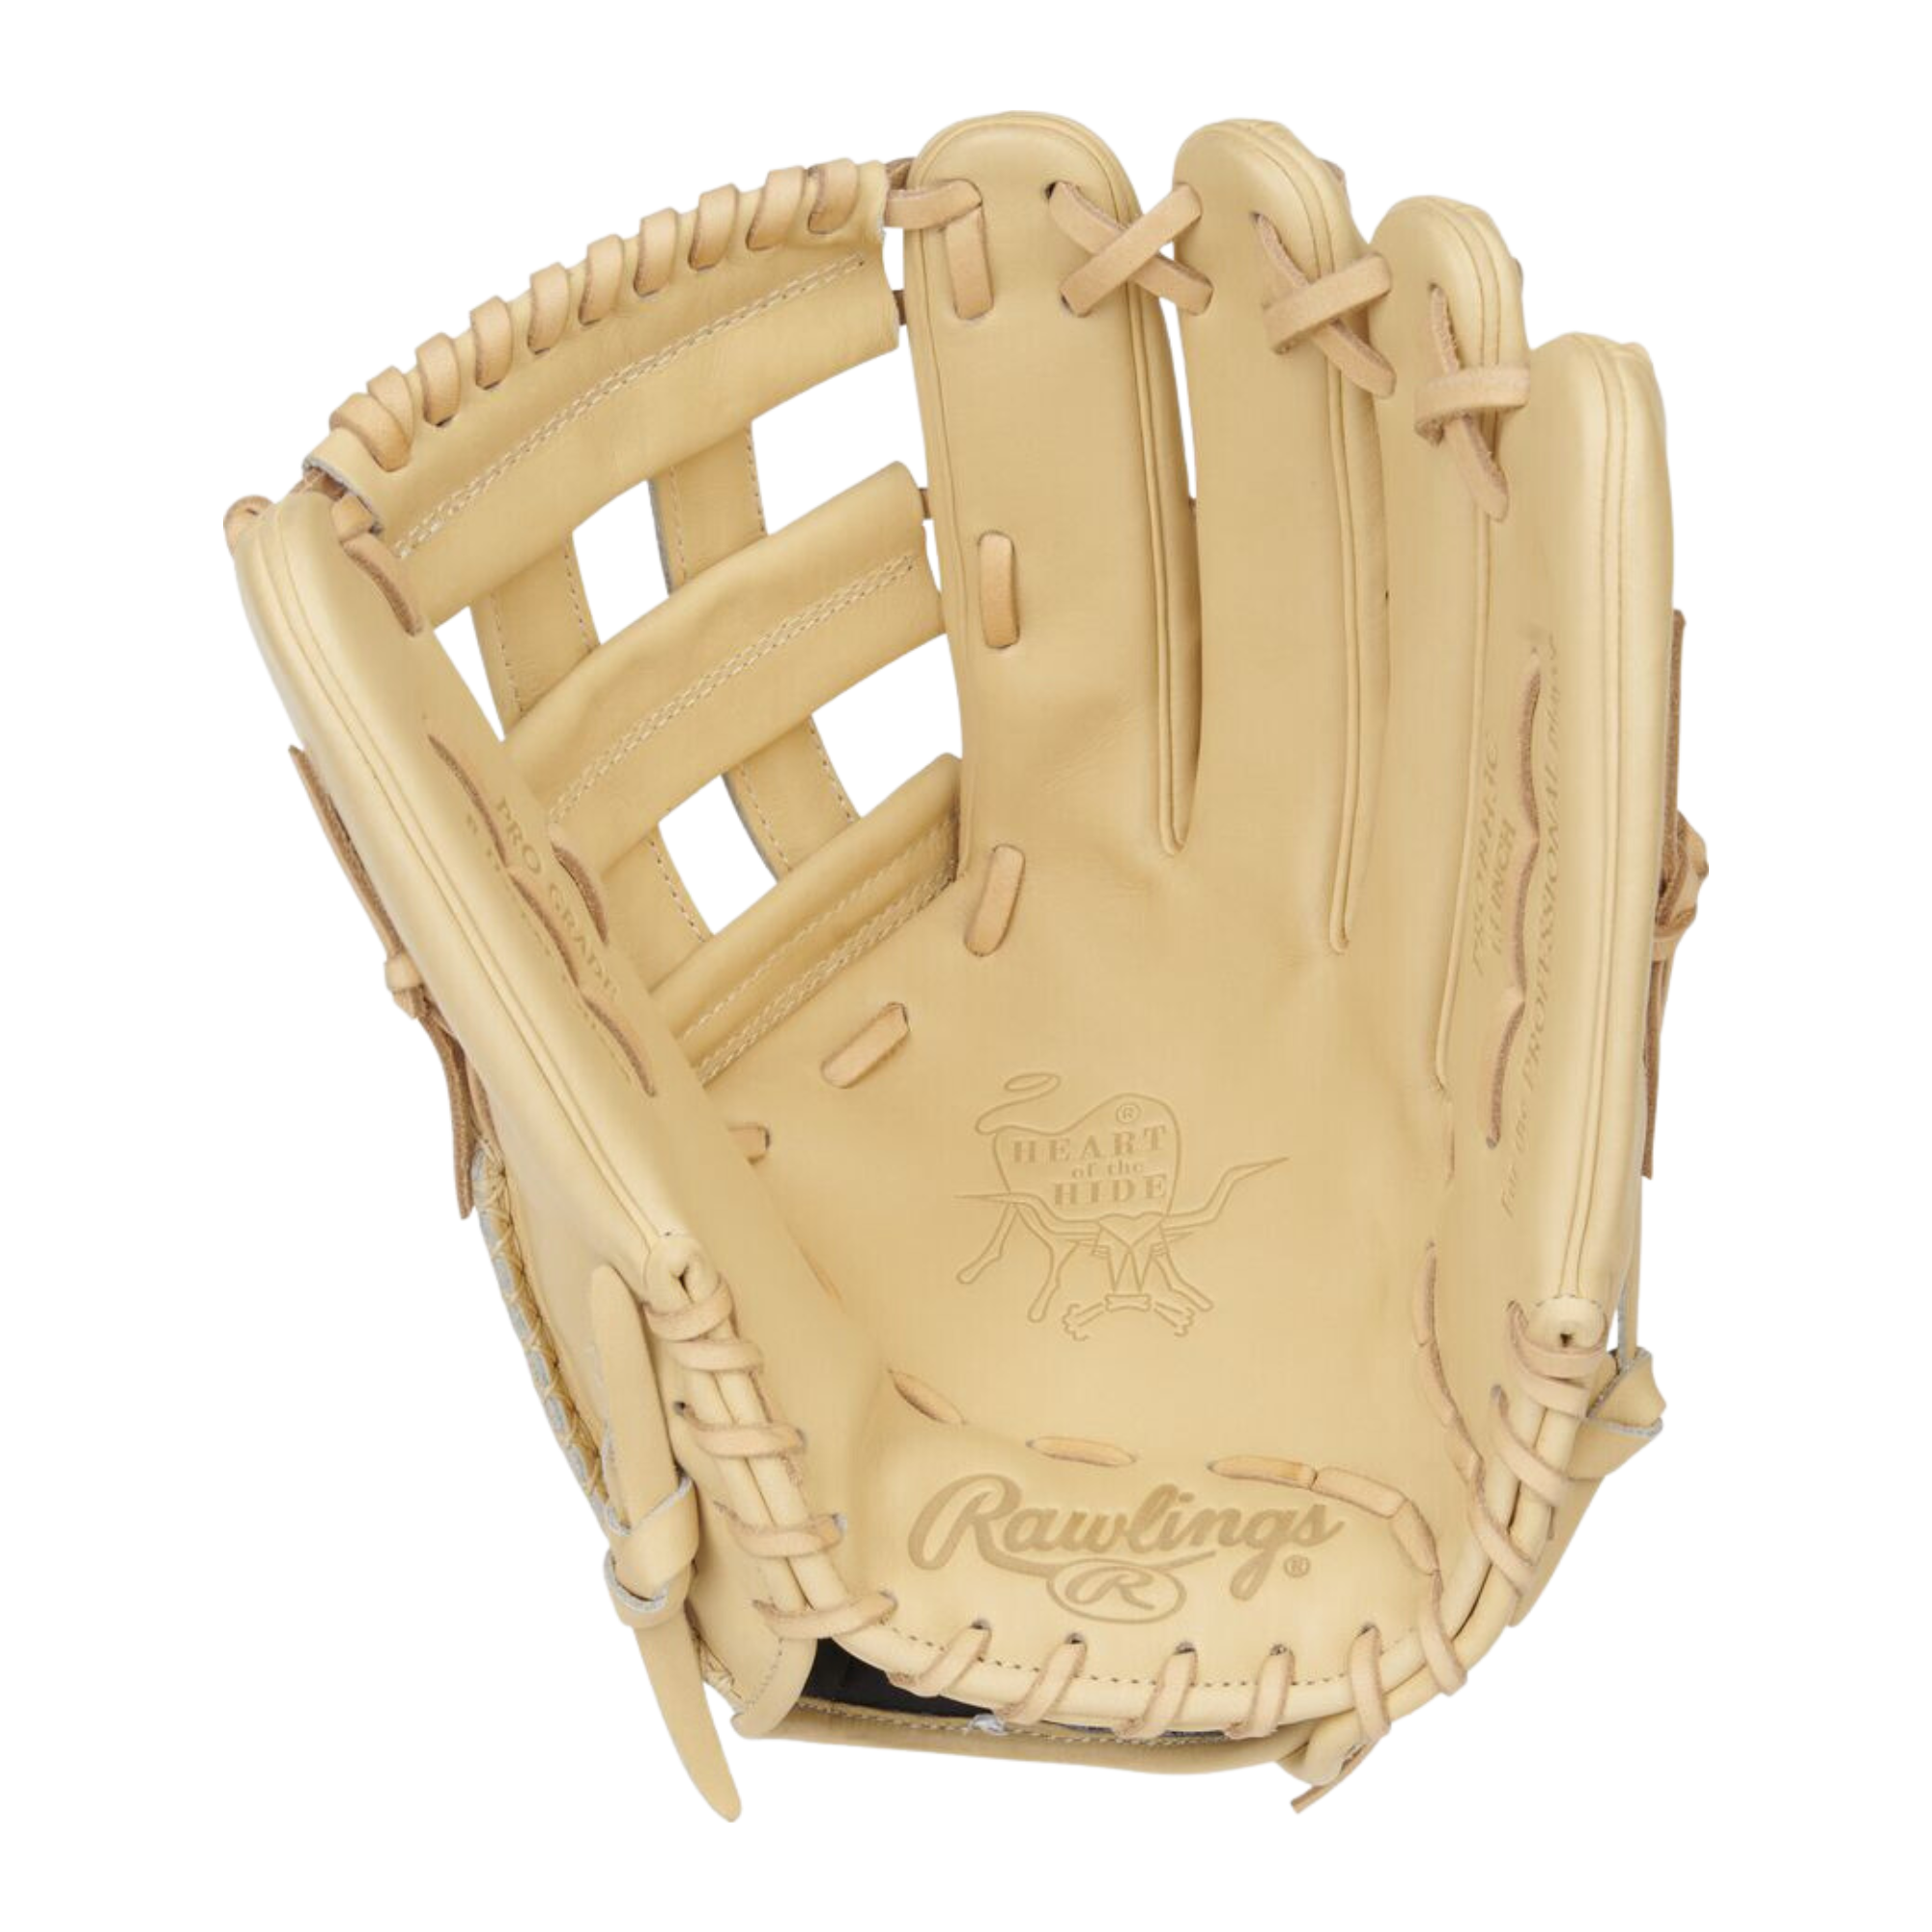 Rawlings Heart of the Hide OF CONV/PROH Web Bryce Harper Gameday Pattern LHT